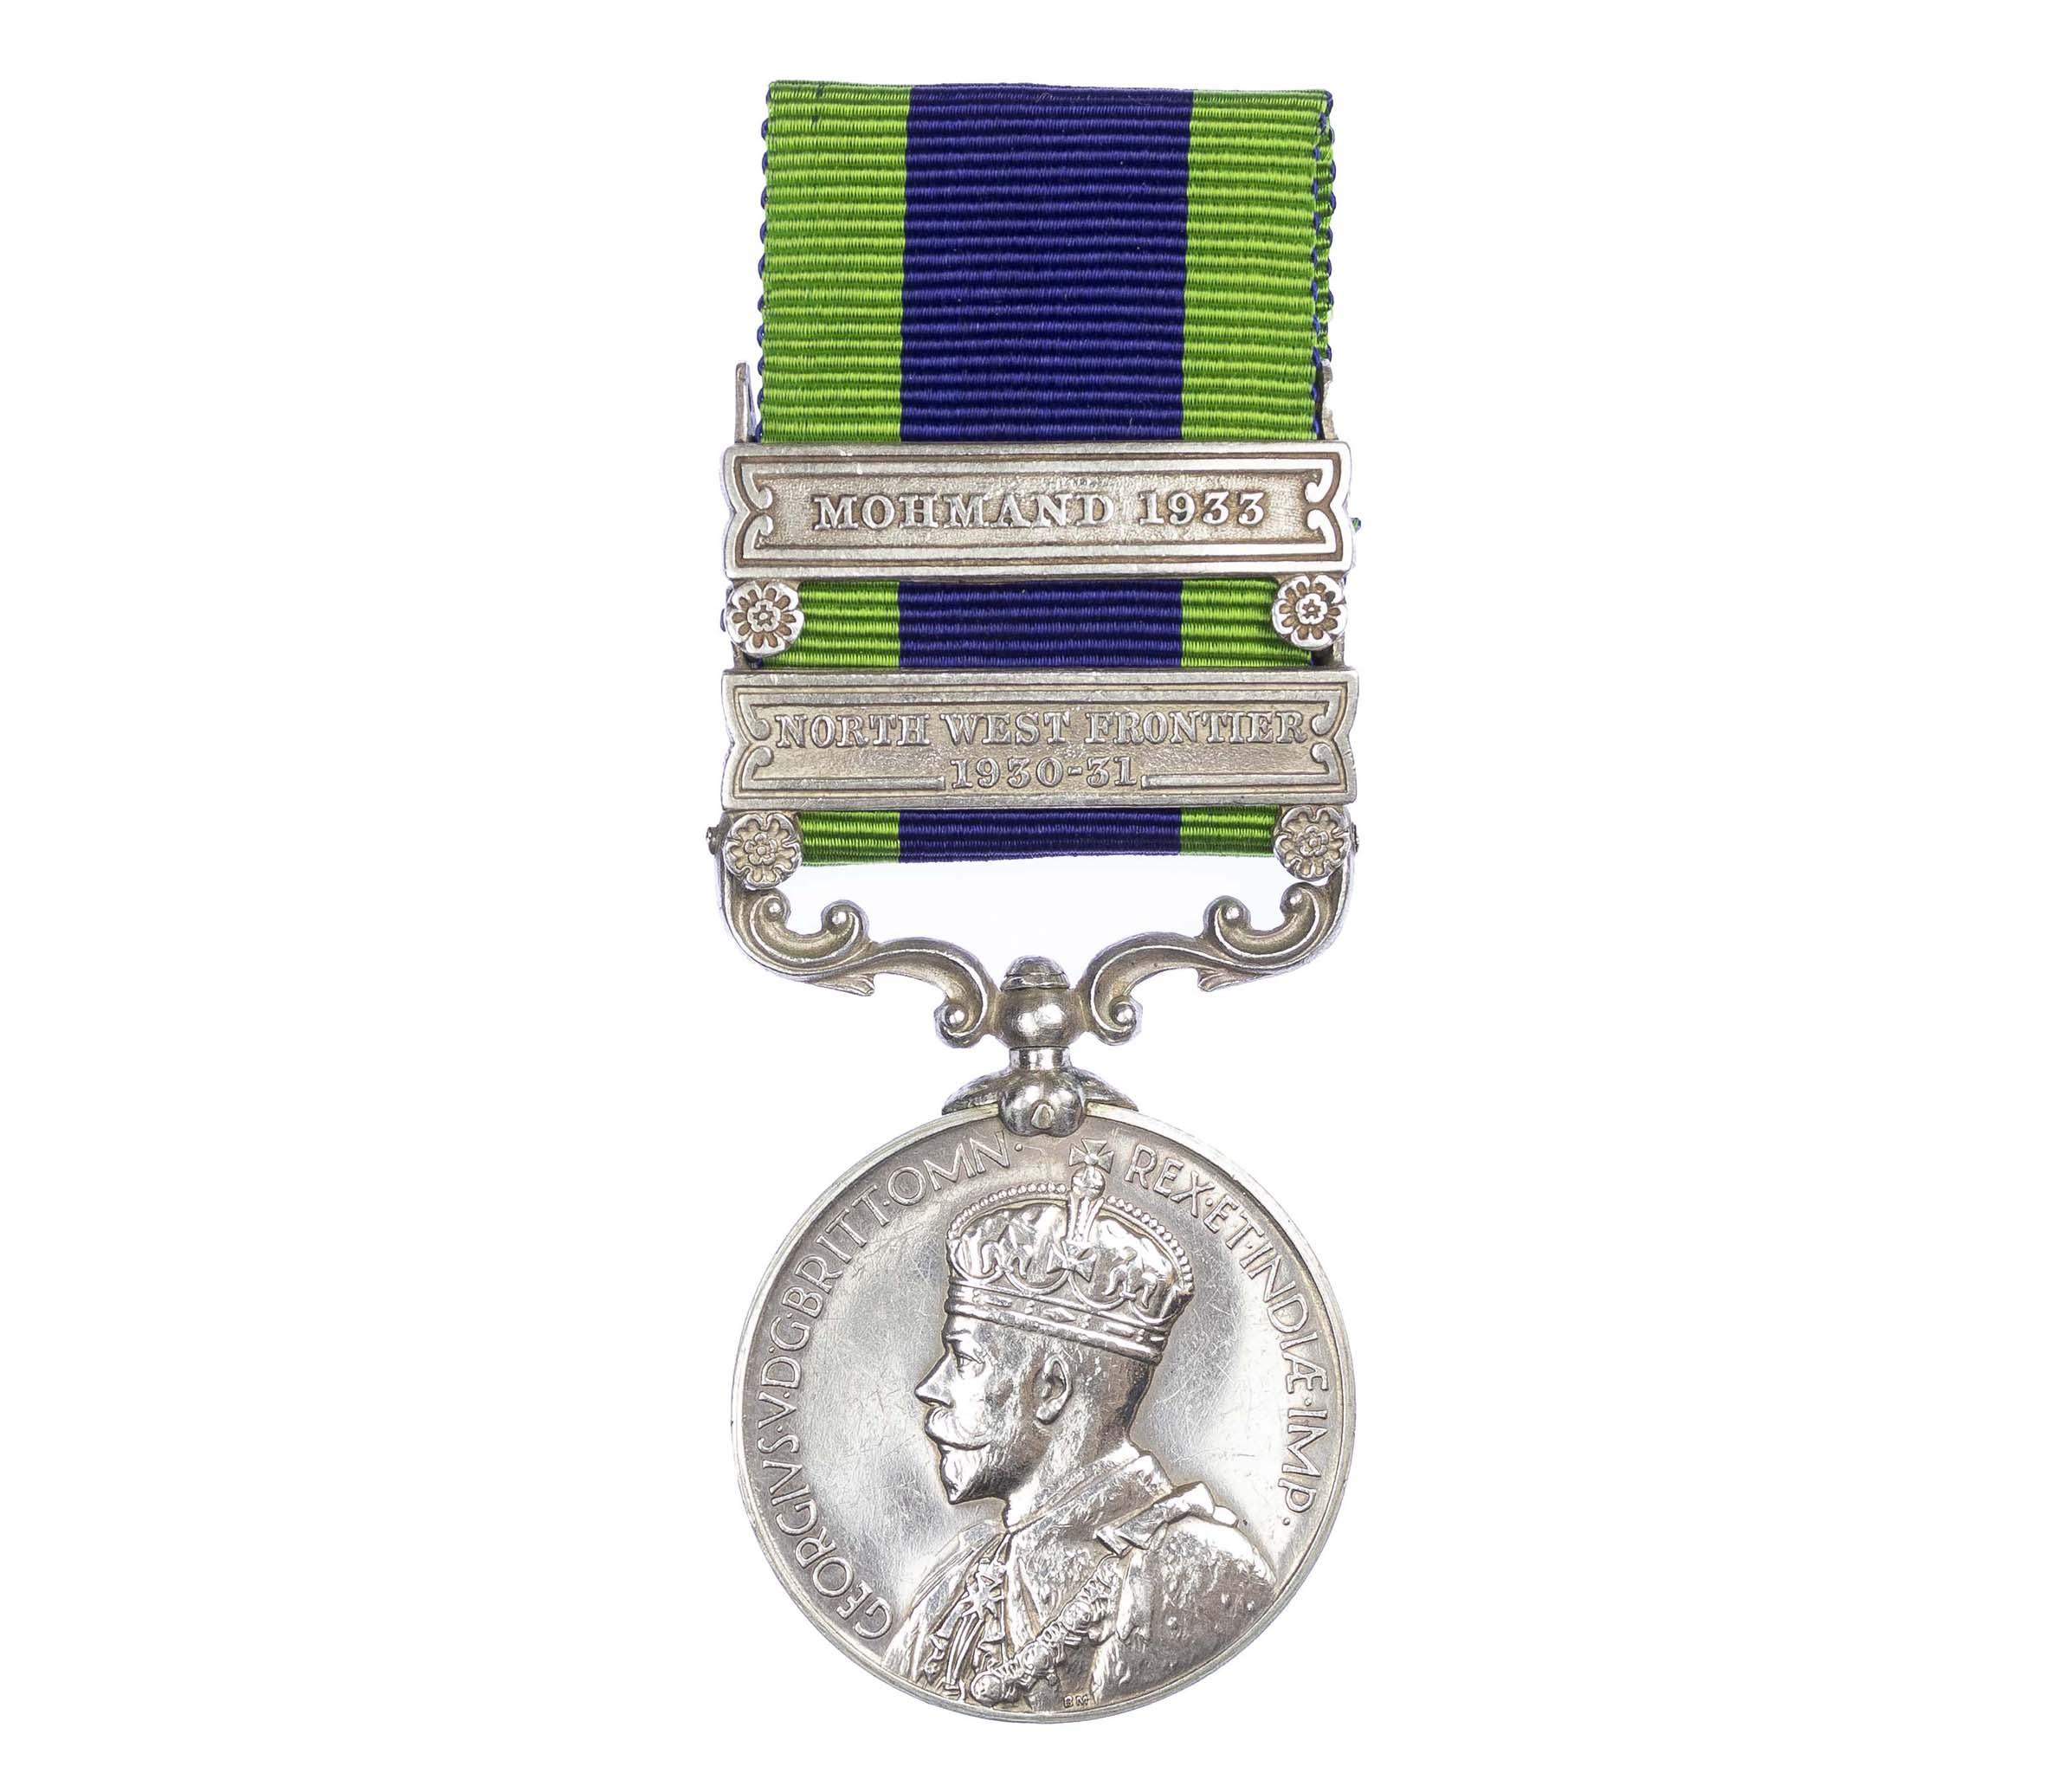 India General Service Medal 1908-1935, GVR, two clasps North West Frontier 1930-31, Mohmand 1933, to Driver Chattar Singh